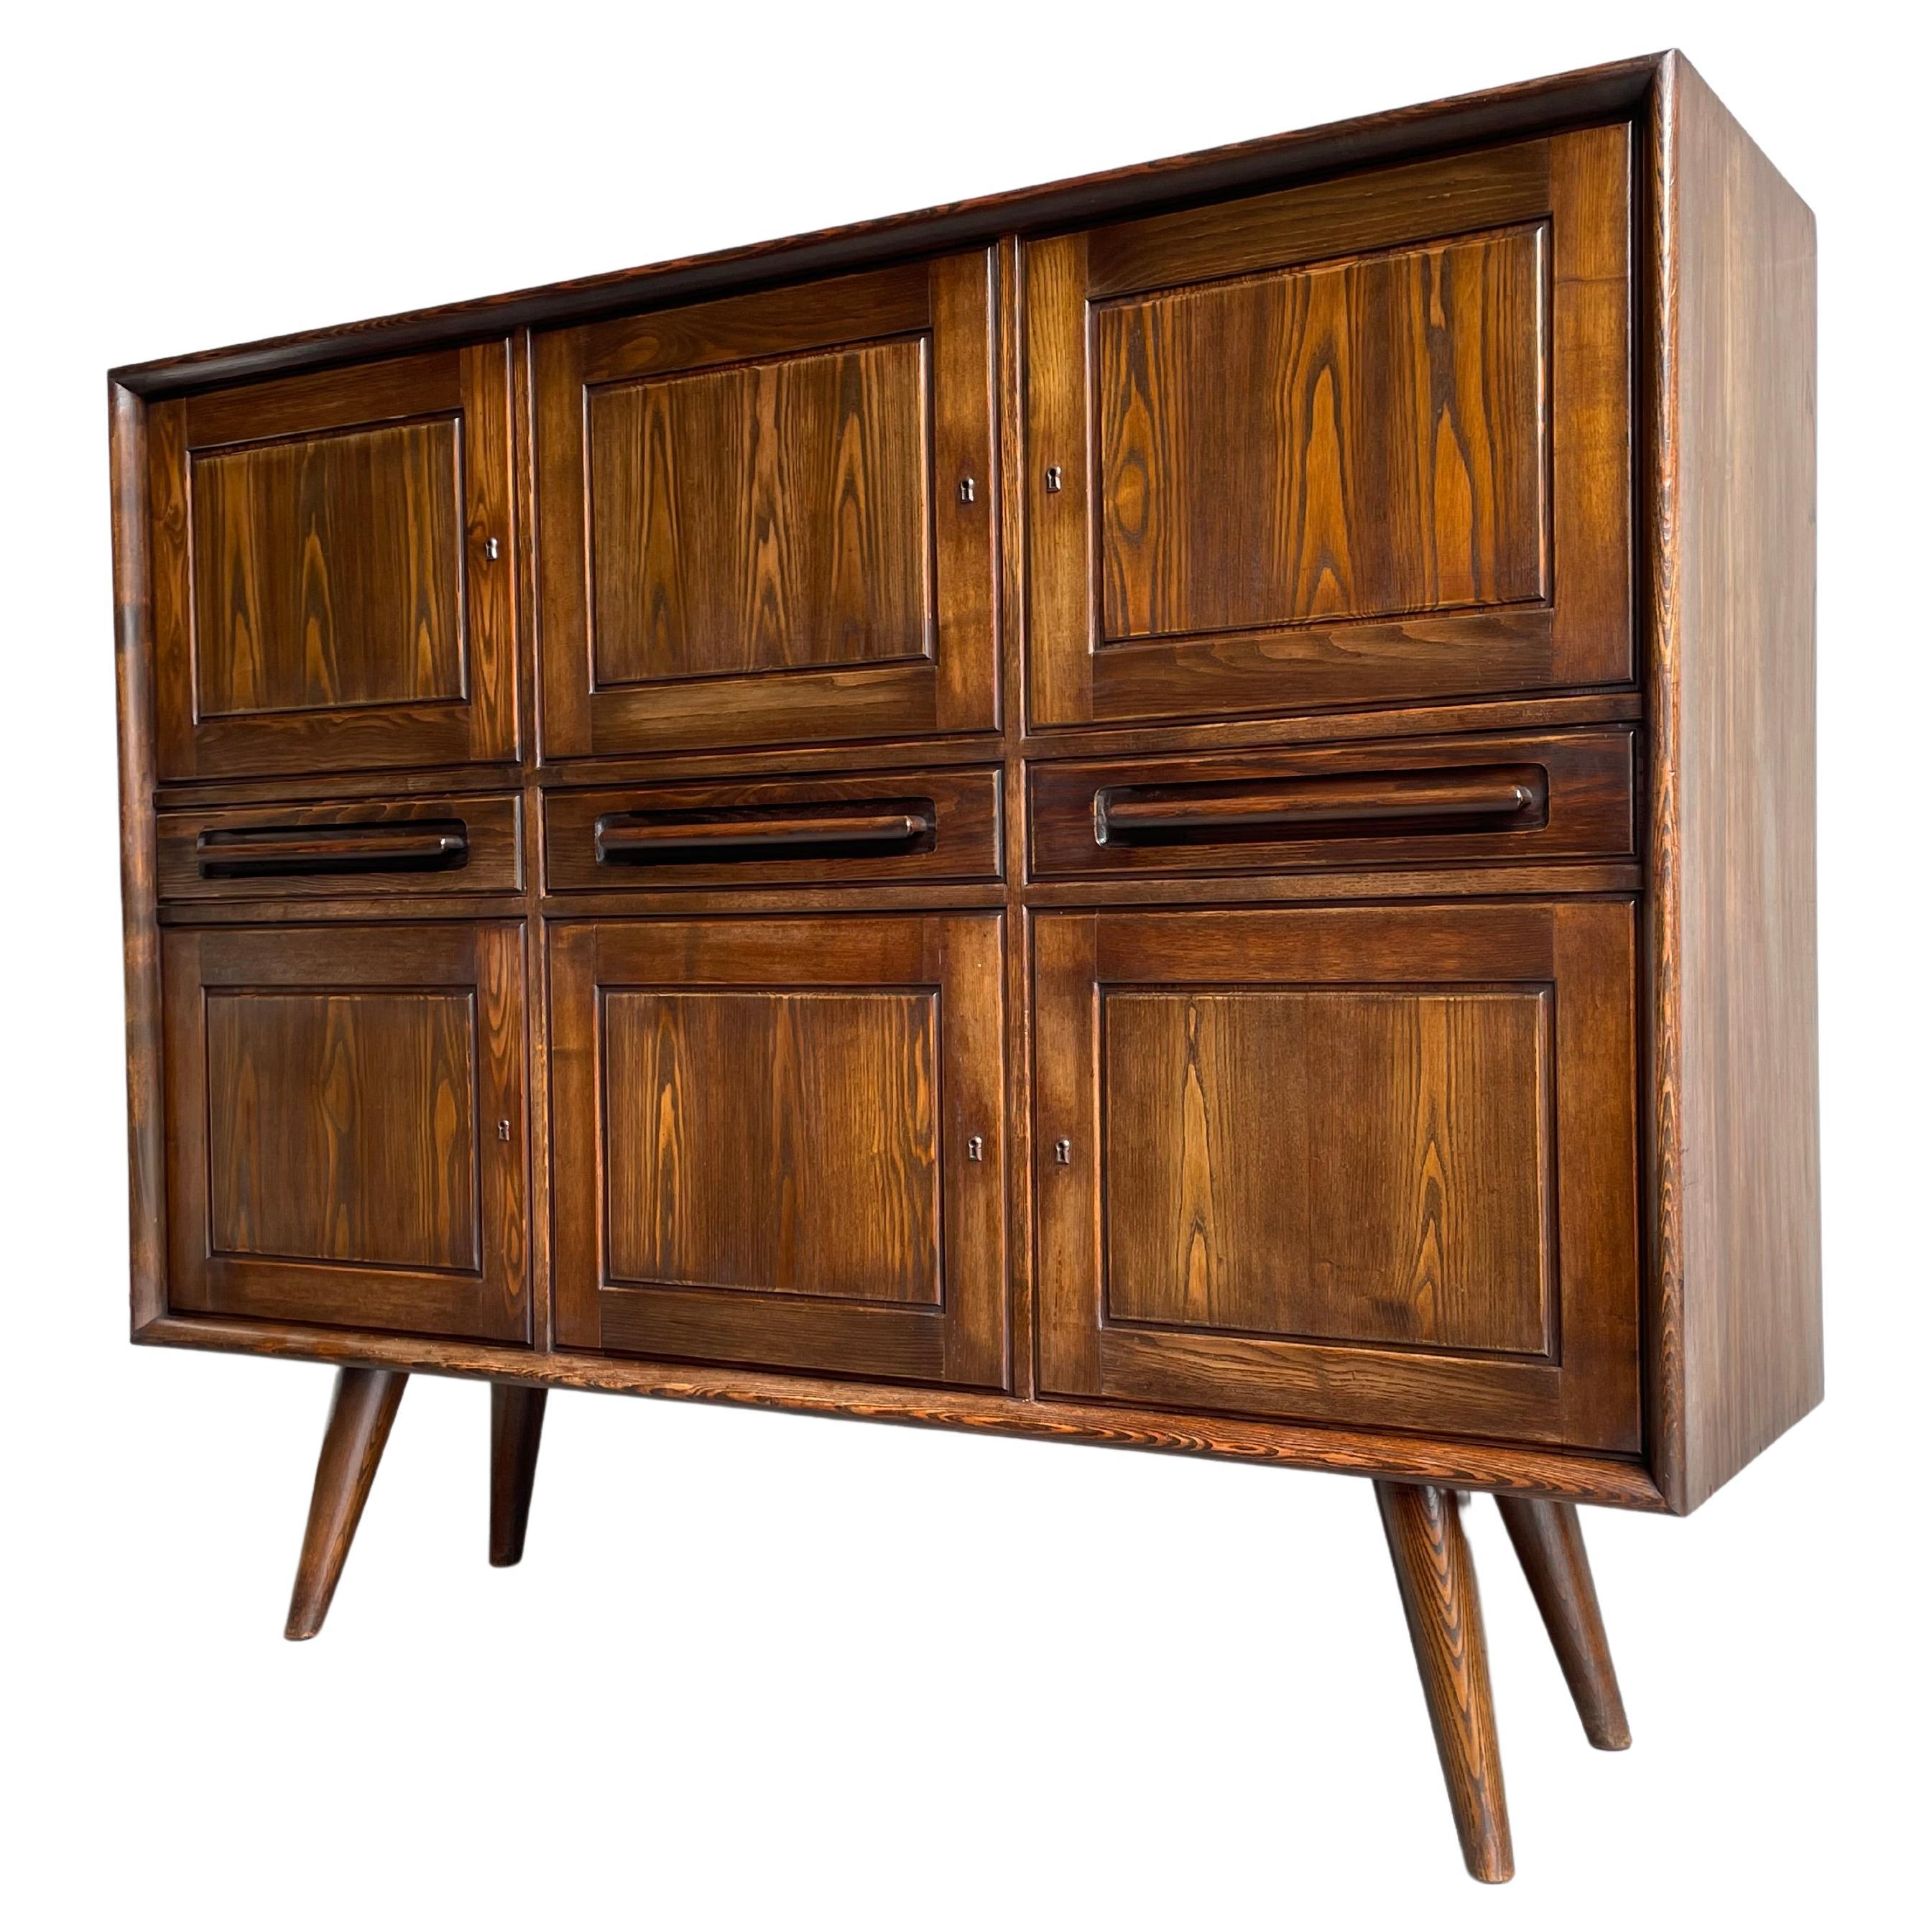 Very Rare Mid-Century Modern Sideboard / Credenza by 't Woonhuys of Amsterdam